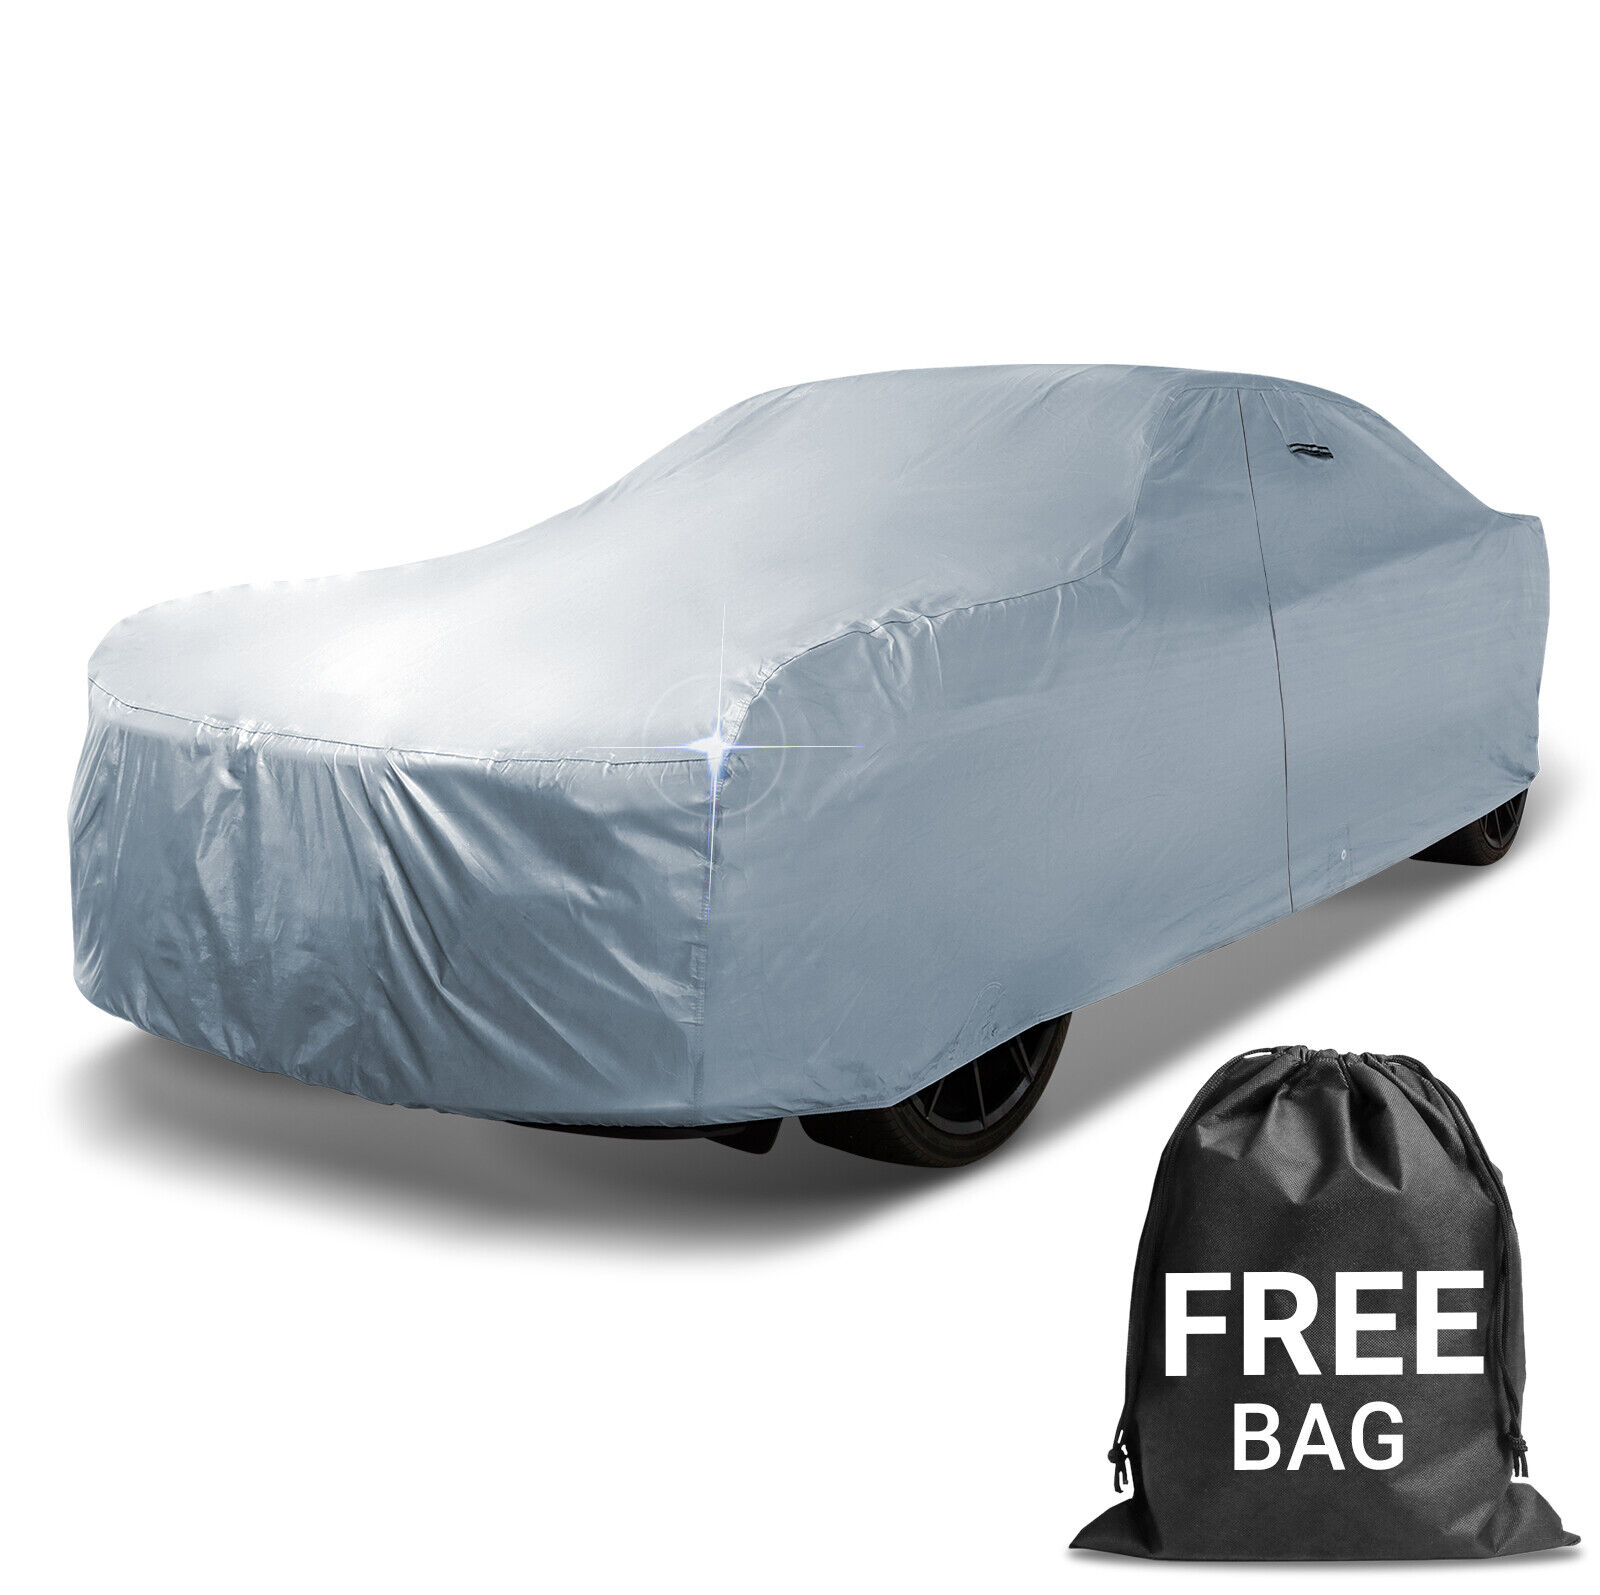 DODGE [POLARA] Custom Waterproof Outdoor Car Cover - 100% All Weather Protection